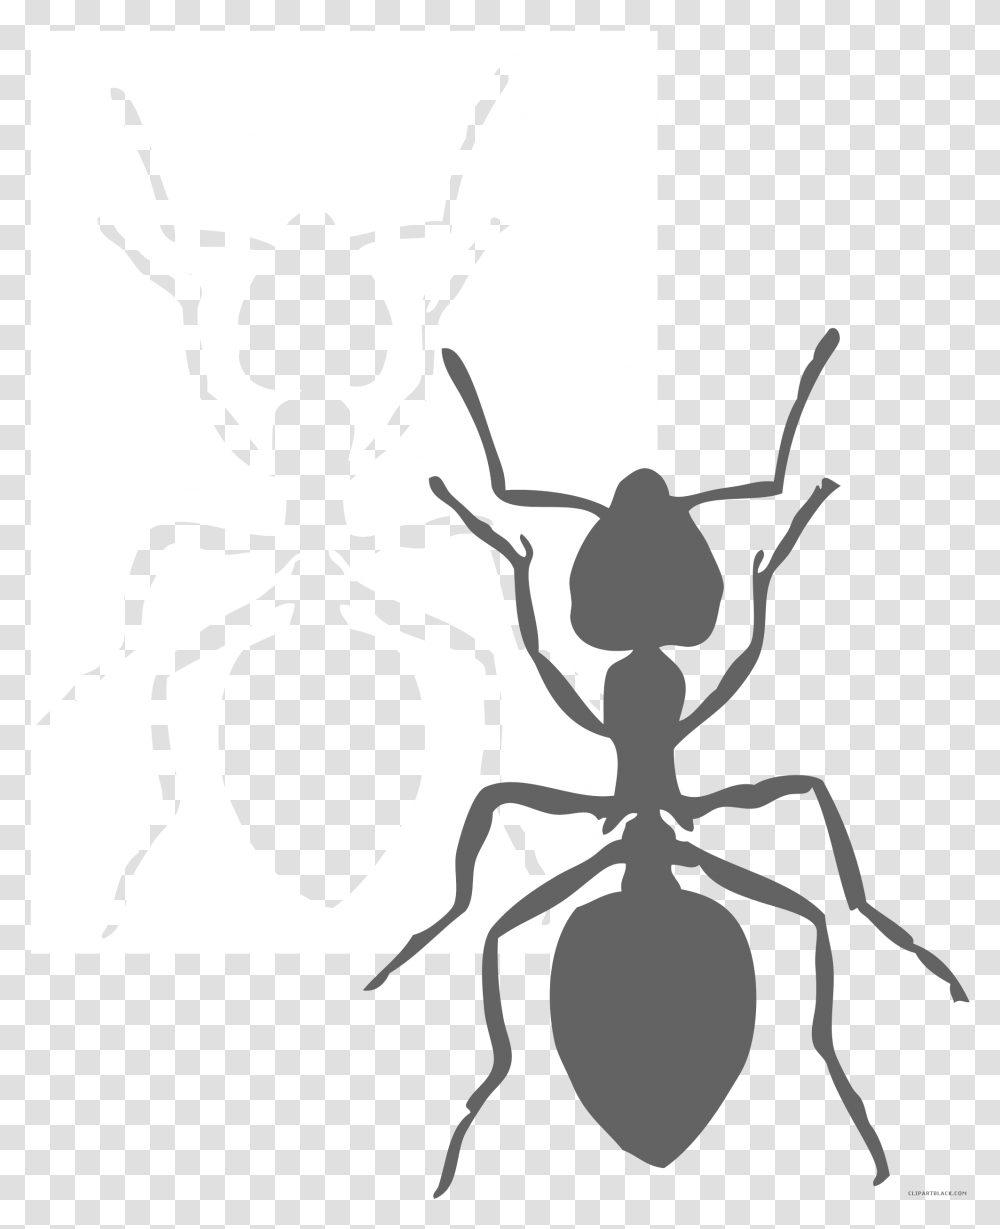 Page Of Clipartblack Com Black And White Big Ant Clipart Black And White, Invertebrate, Animal, Insect Transparent Png